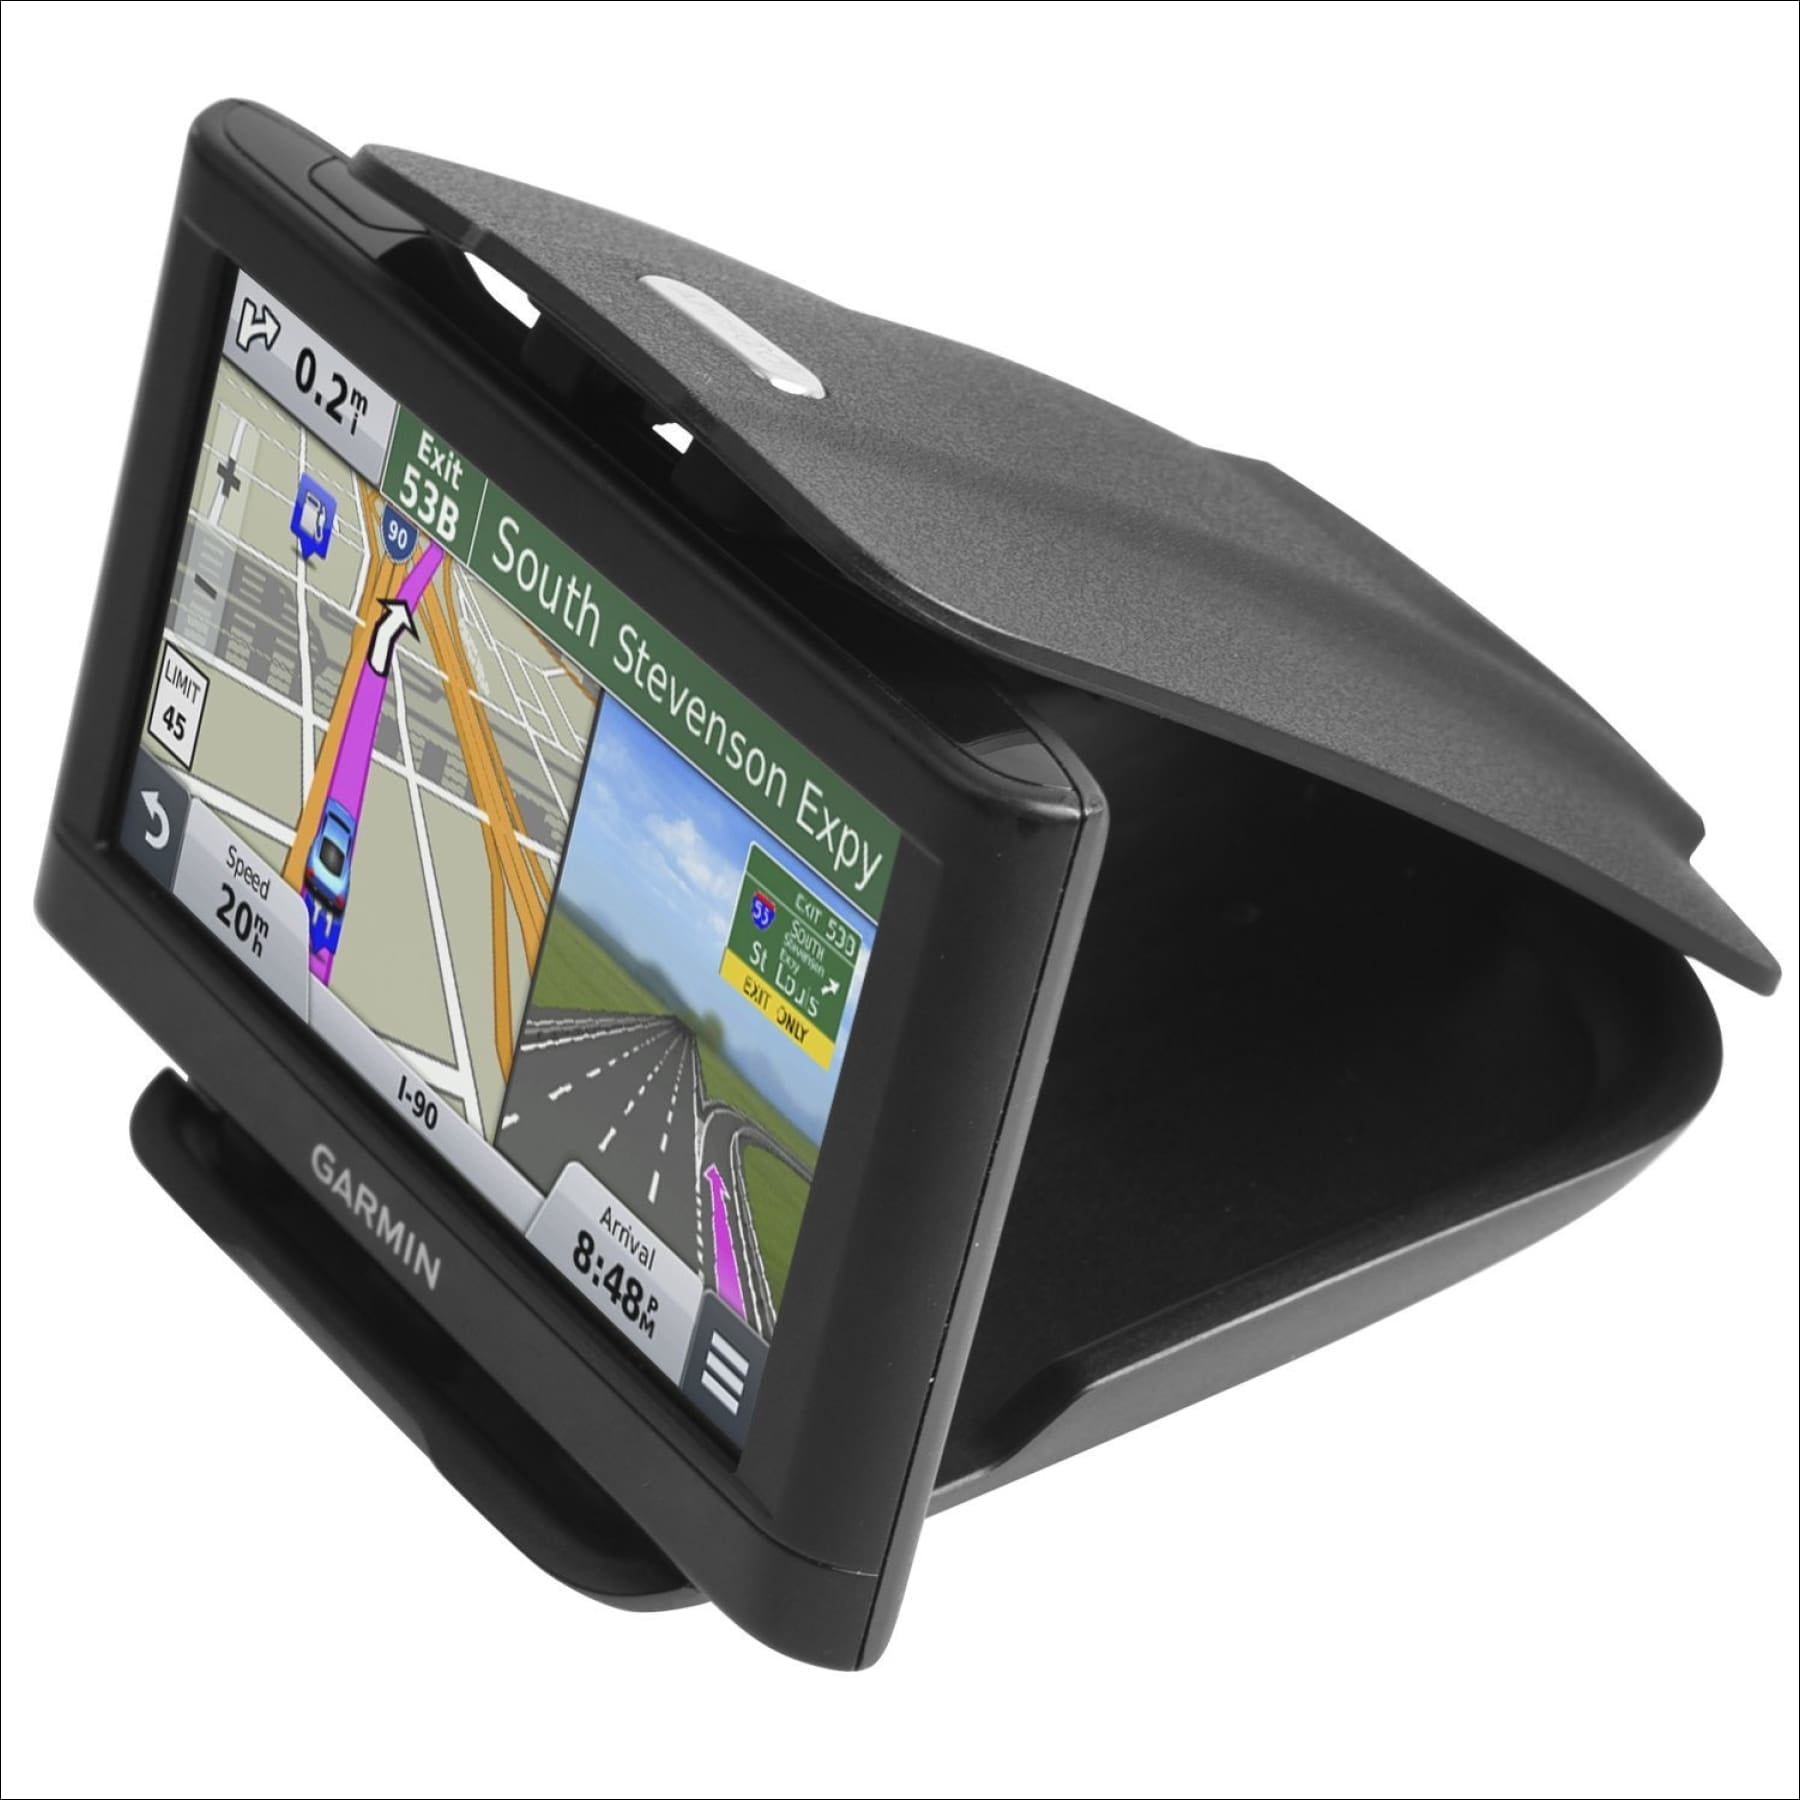 Universal Dashbaord Phone Tablet PC Navigation Holder for Garmin Nuvi Tomtom iPhone iPad Galaxy Yoga Android Fits 4.3-9.6 GPS & Smartphone Friction Mount Holder iSaddle Dashboard GPS Mount Holder 